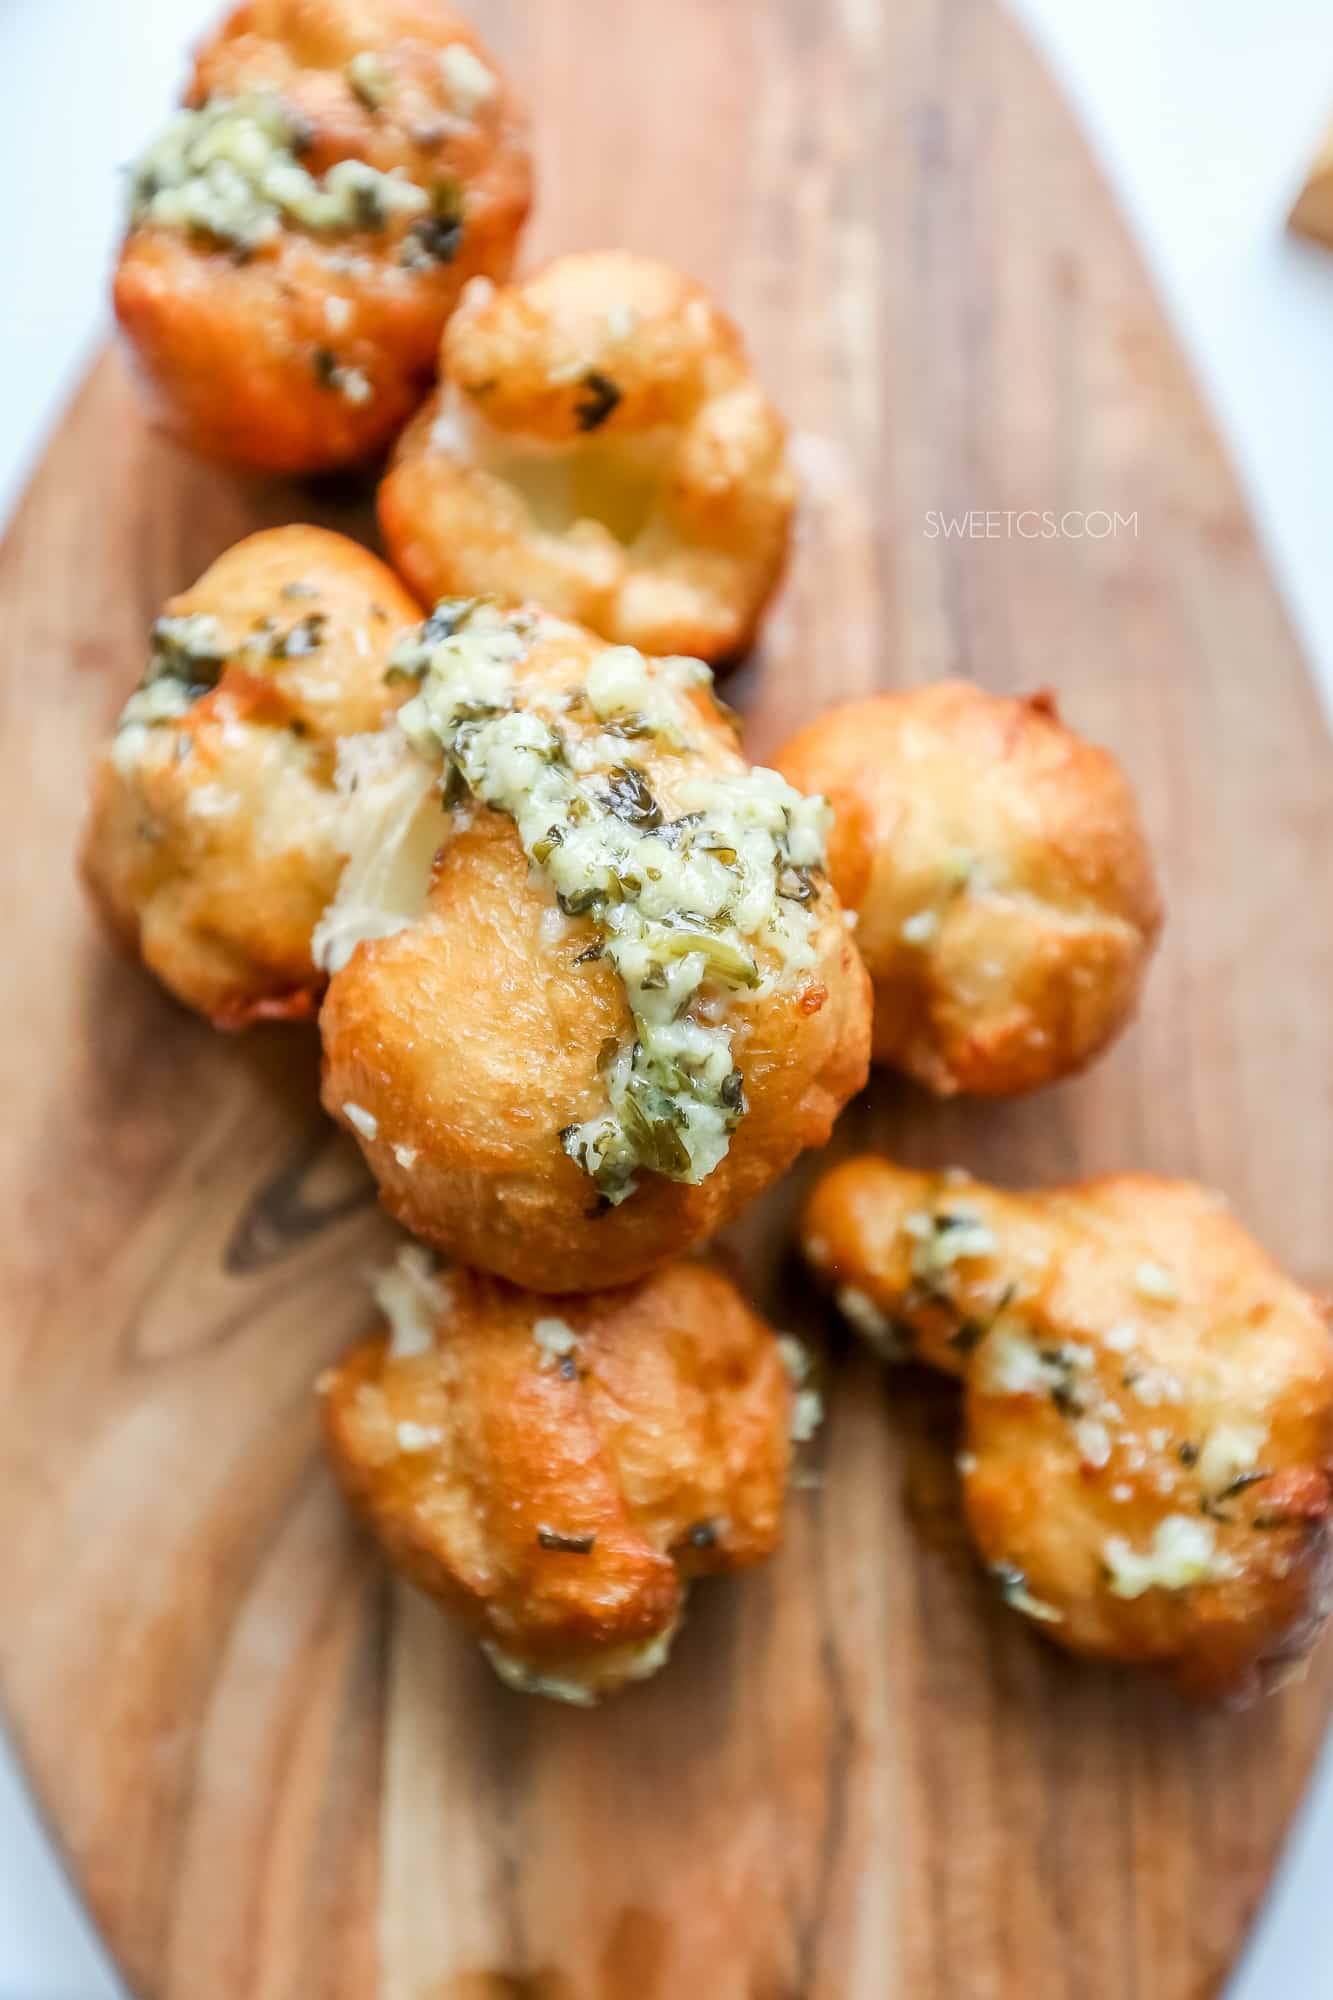 These garlic cheese bombs are the most epic appetizer ever- and so easy to make!